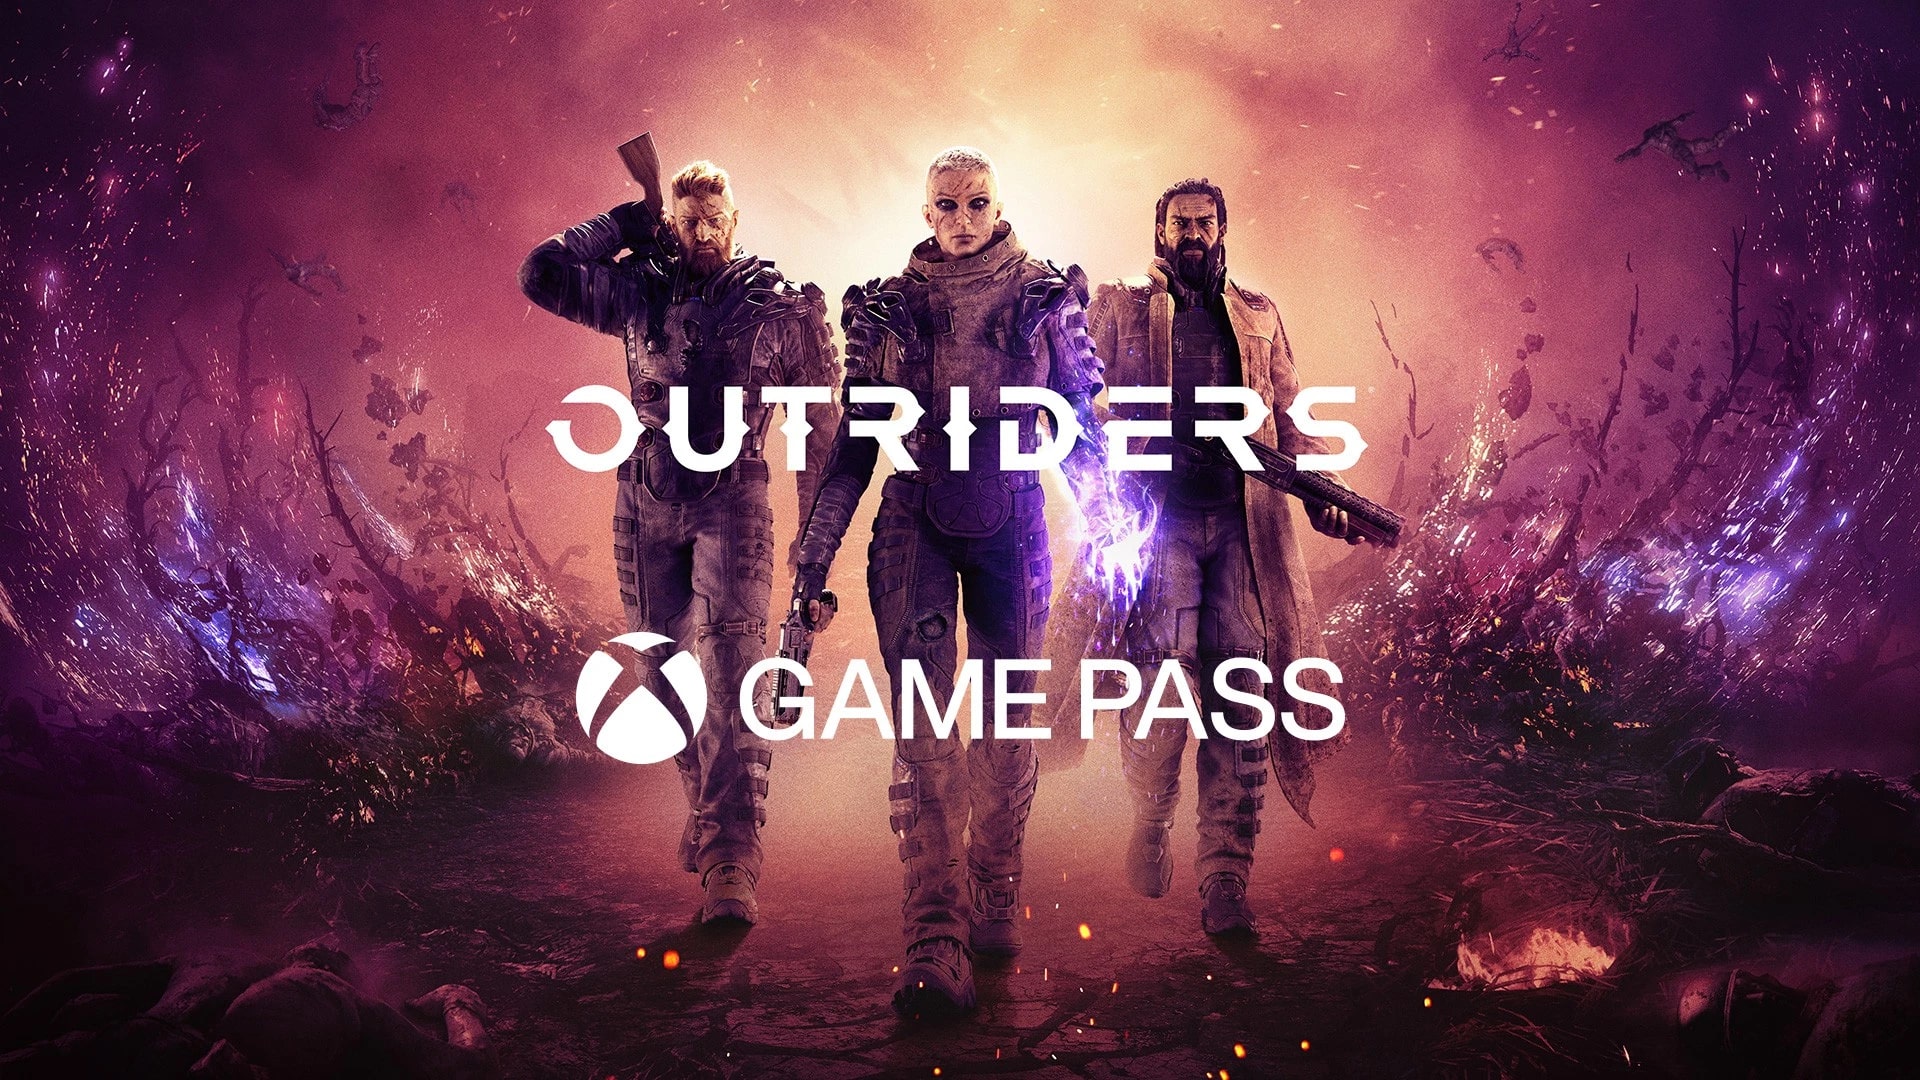 outriders on game pass pc